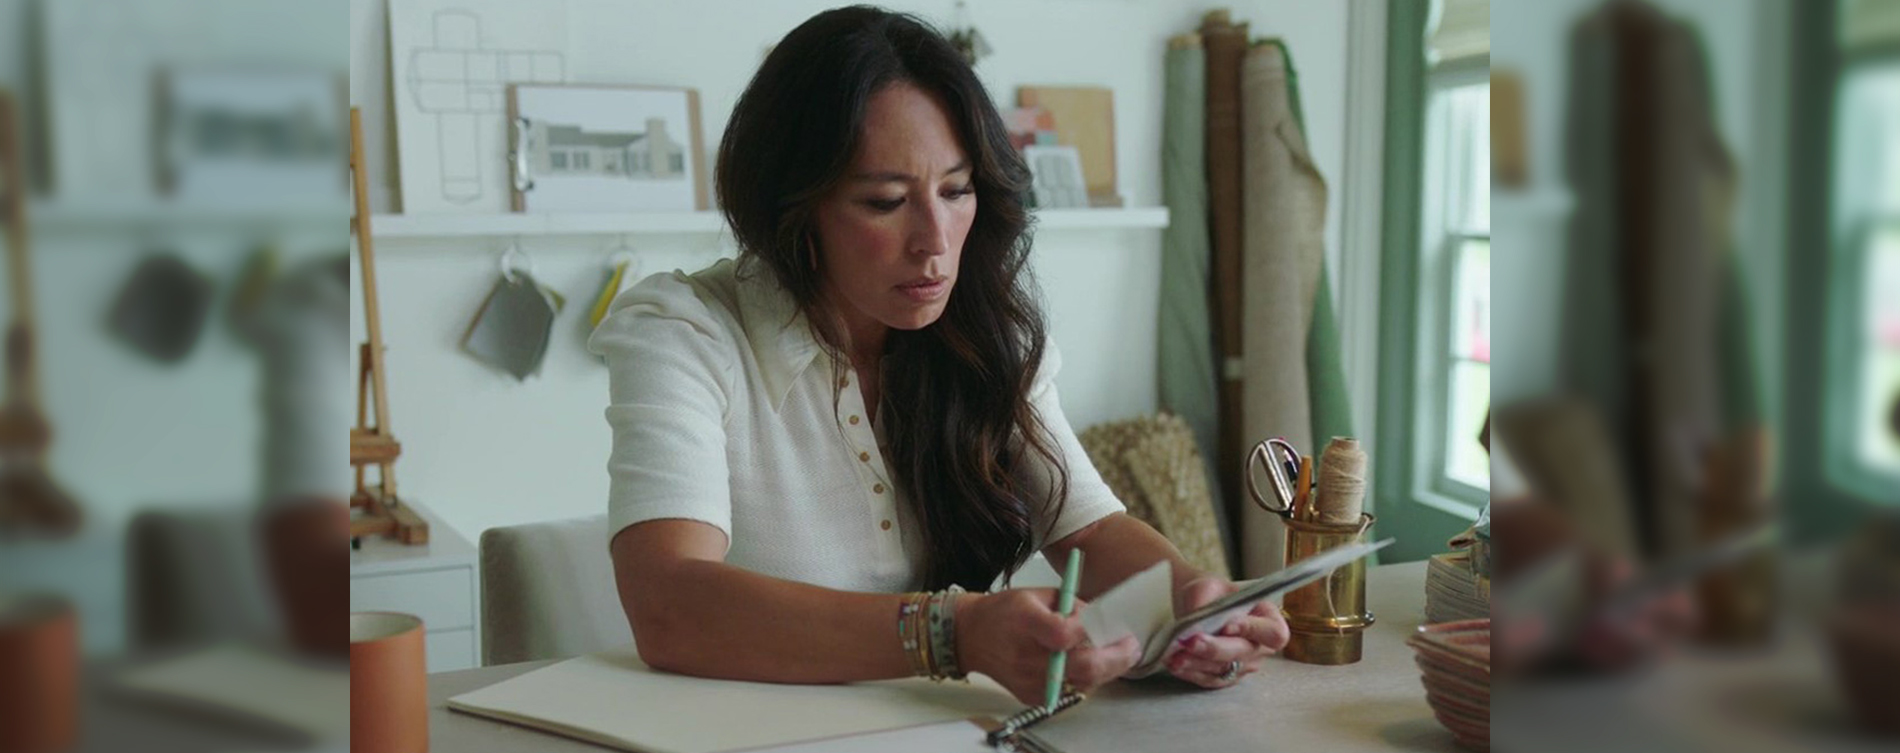 Joanna Gaines’ journey to create a collection of hand-selected home exterior products.